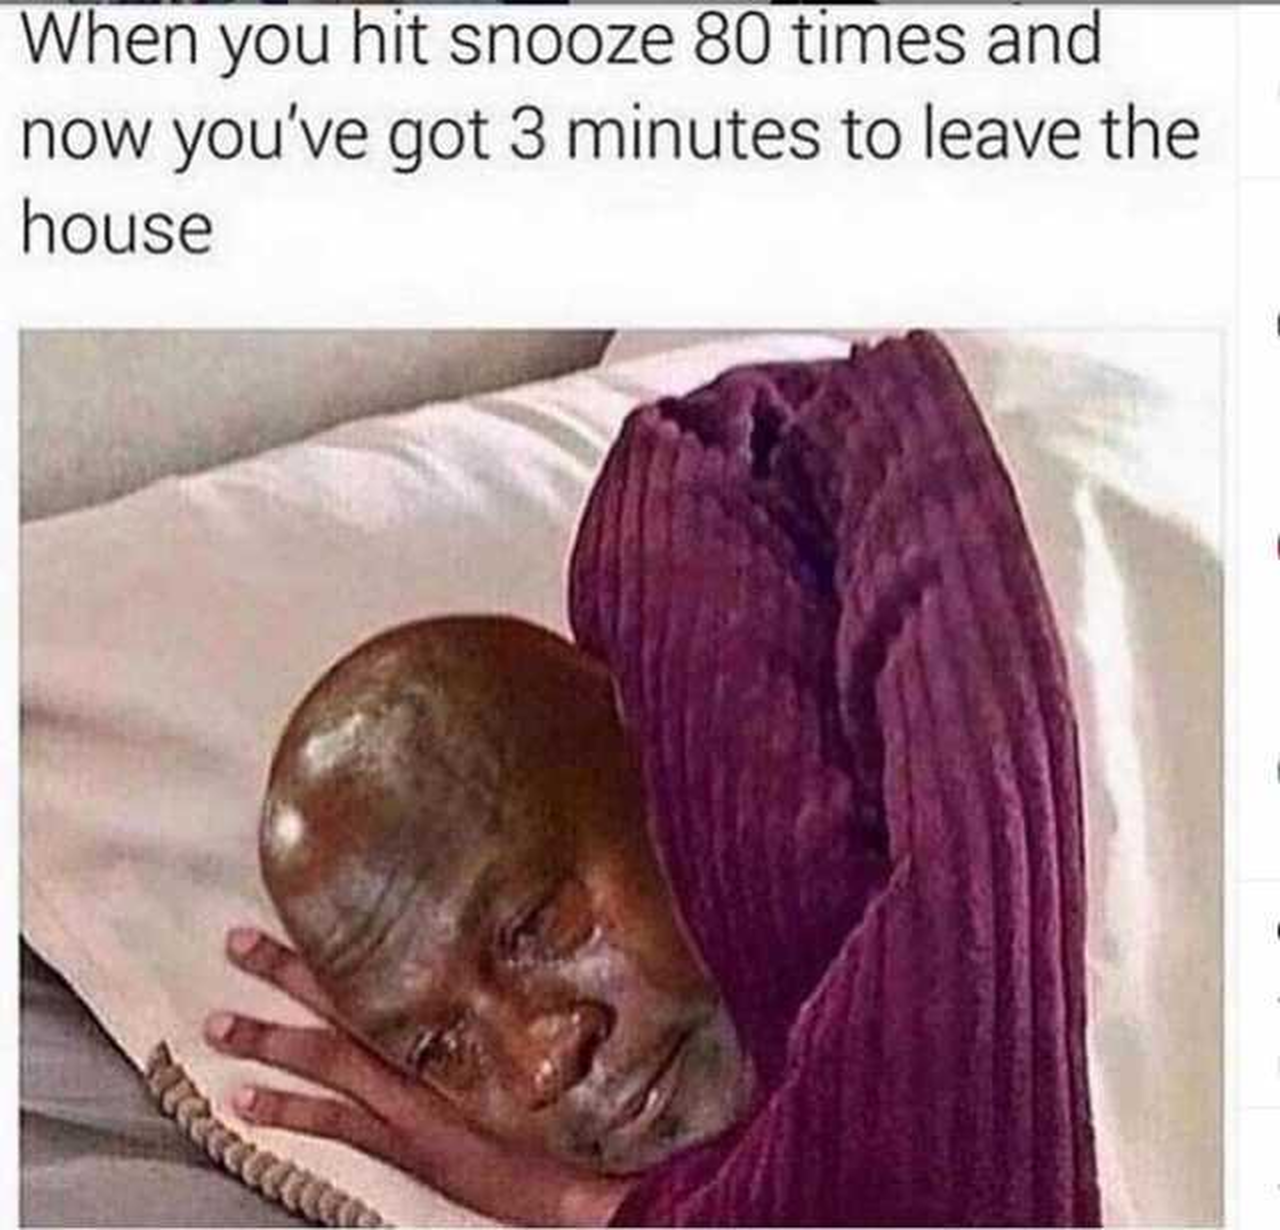 man crying in his bed captioned 'When you hit snooze 80 times and now you've got 3 minutes to leave the house."